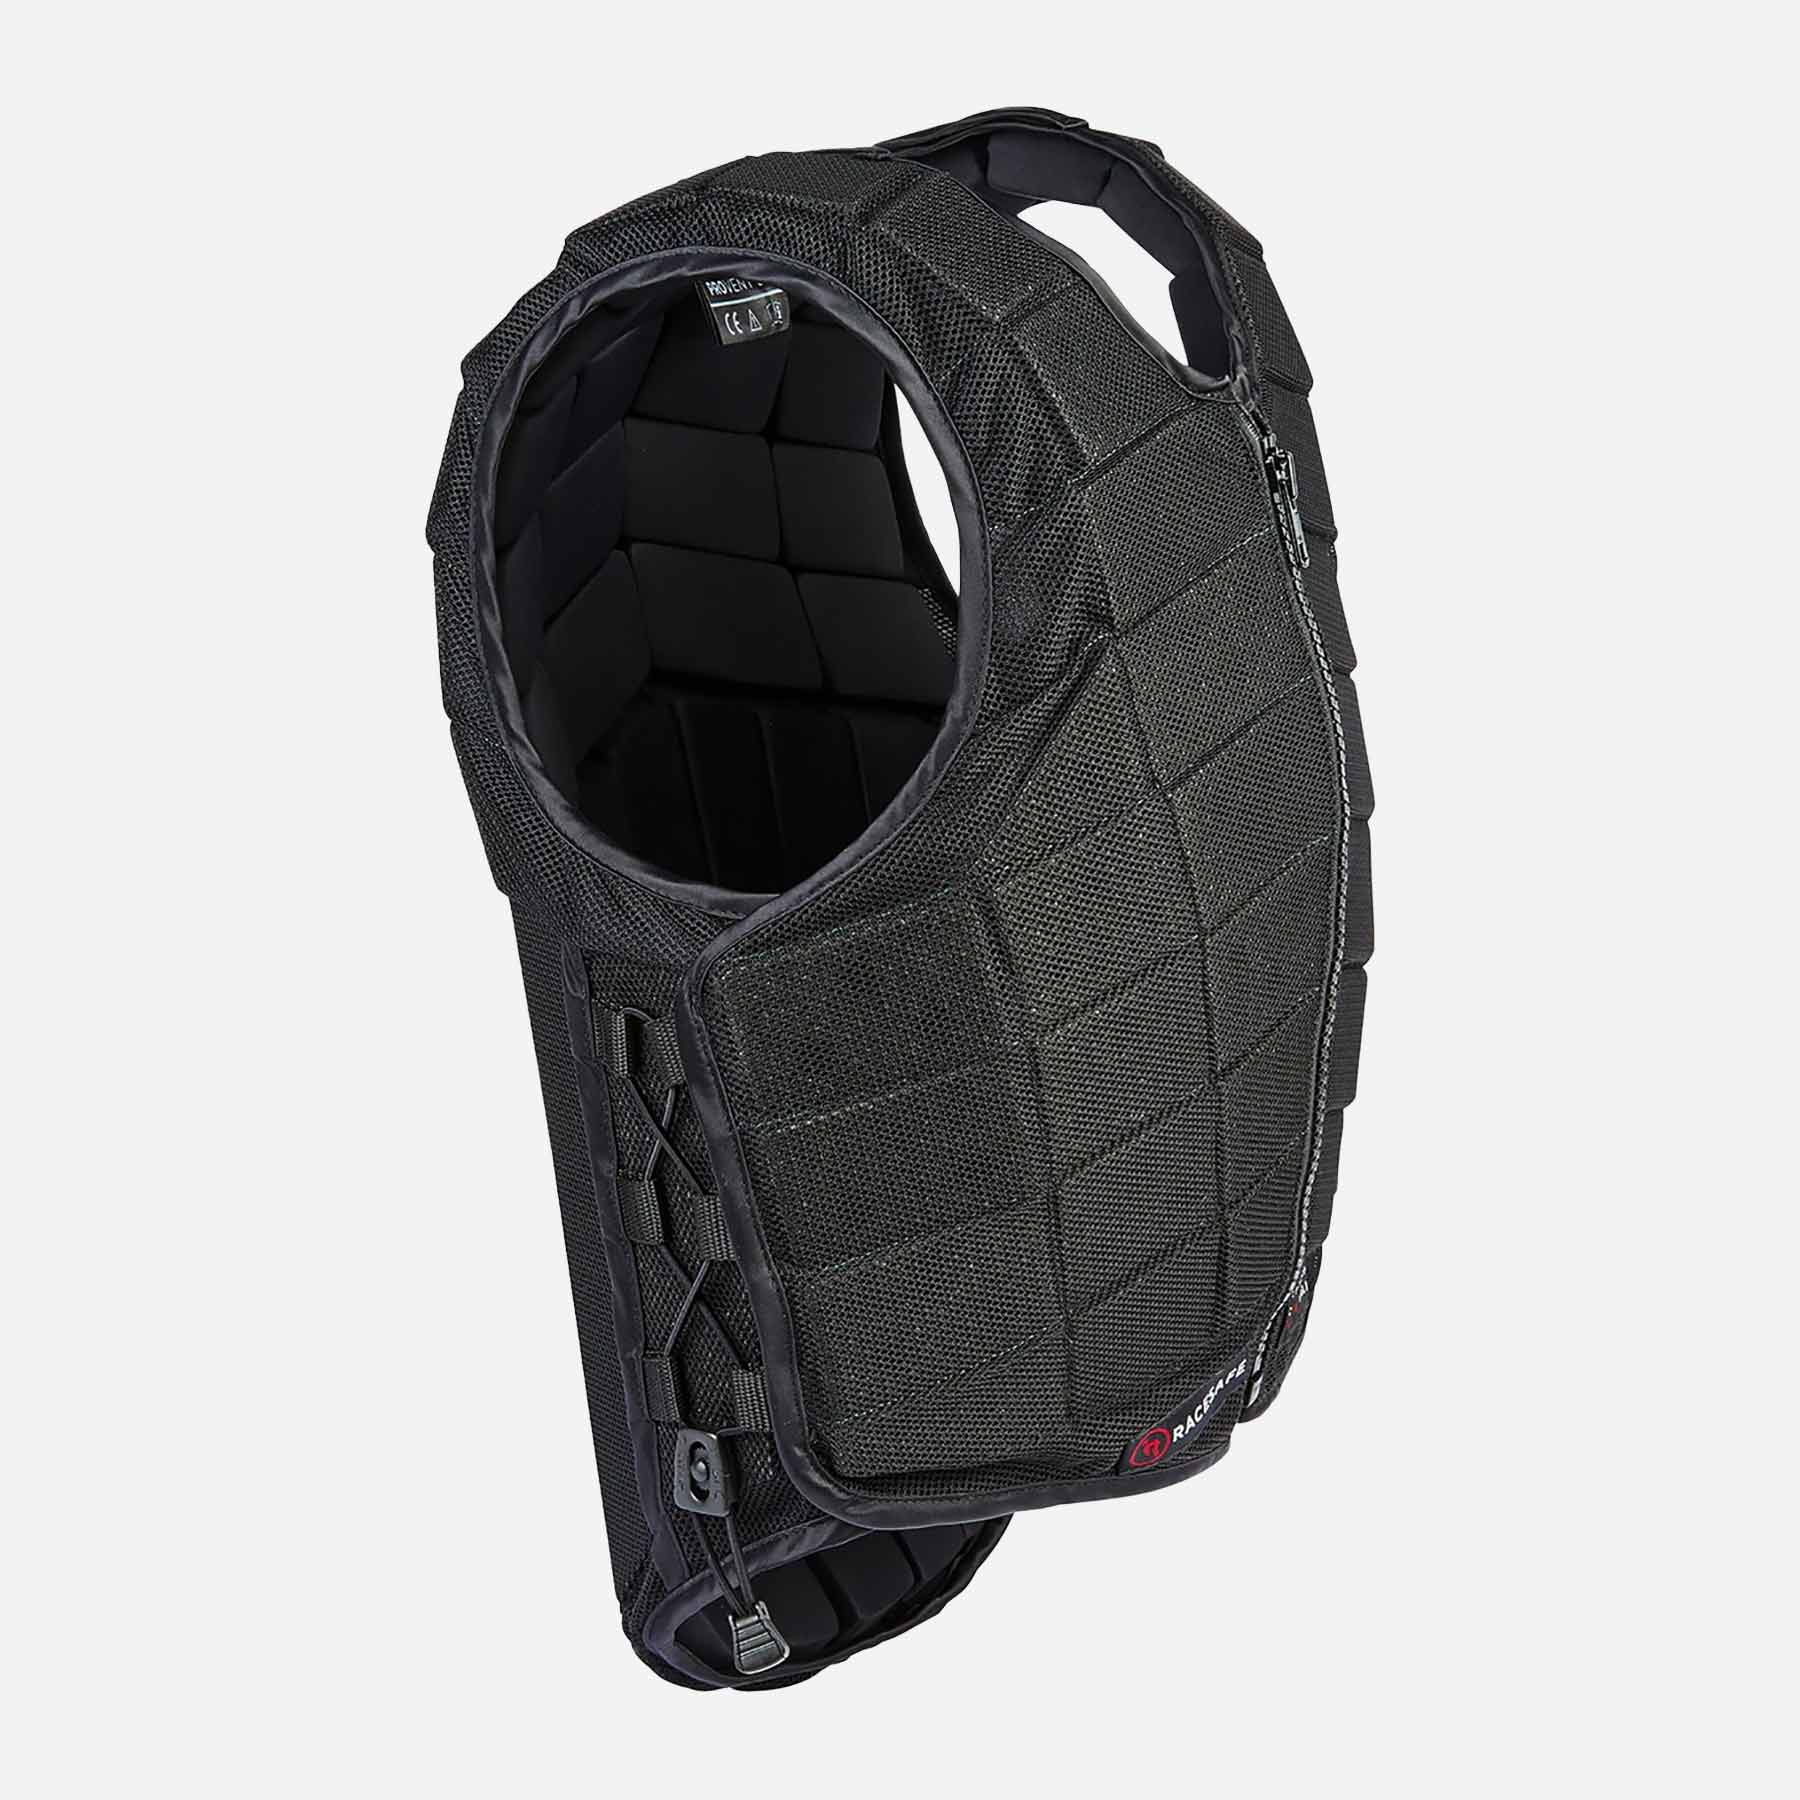 Racesafe ProVent 3.0 Body Protector - Adults